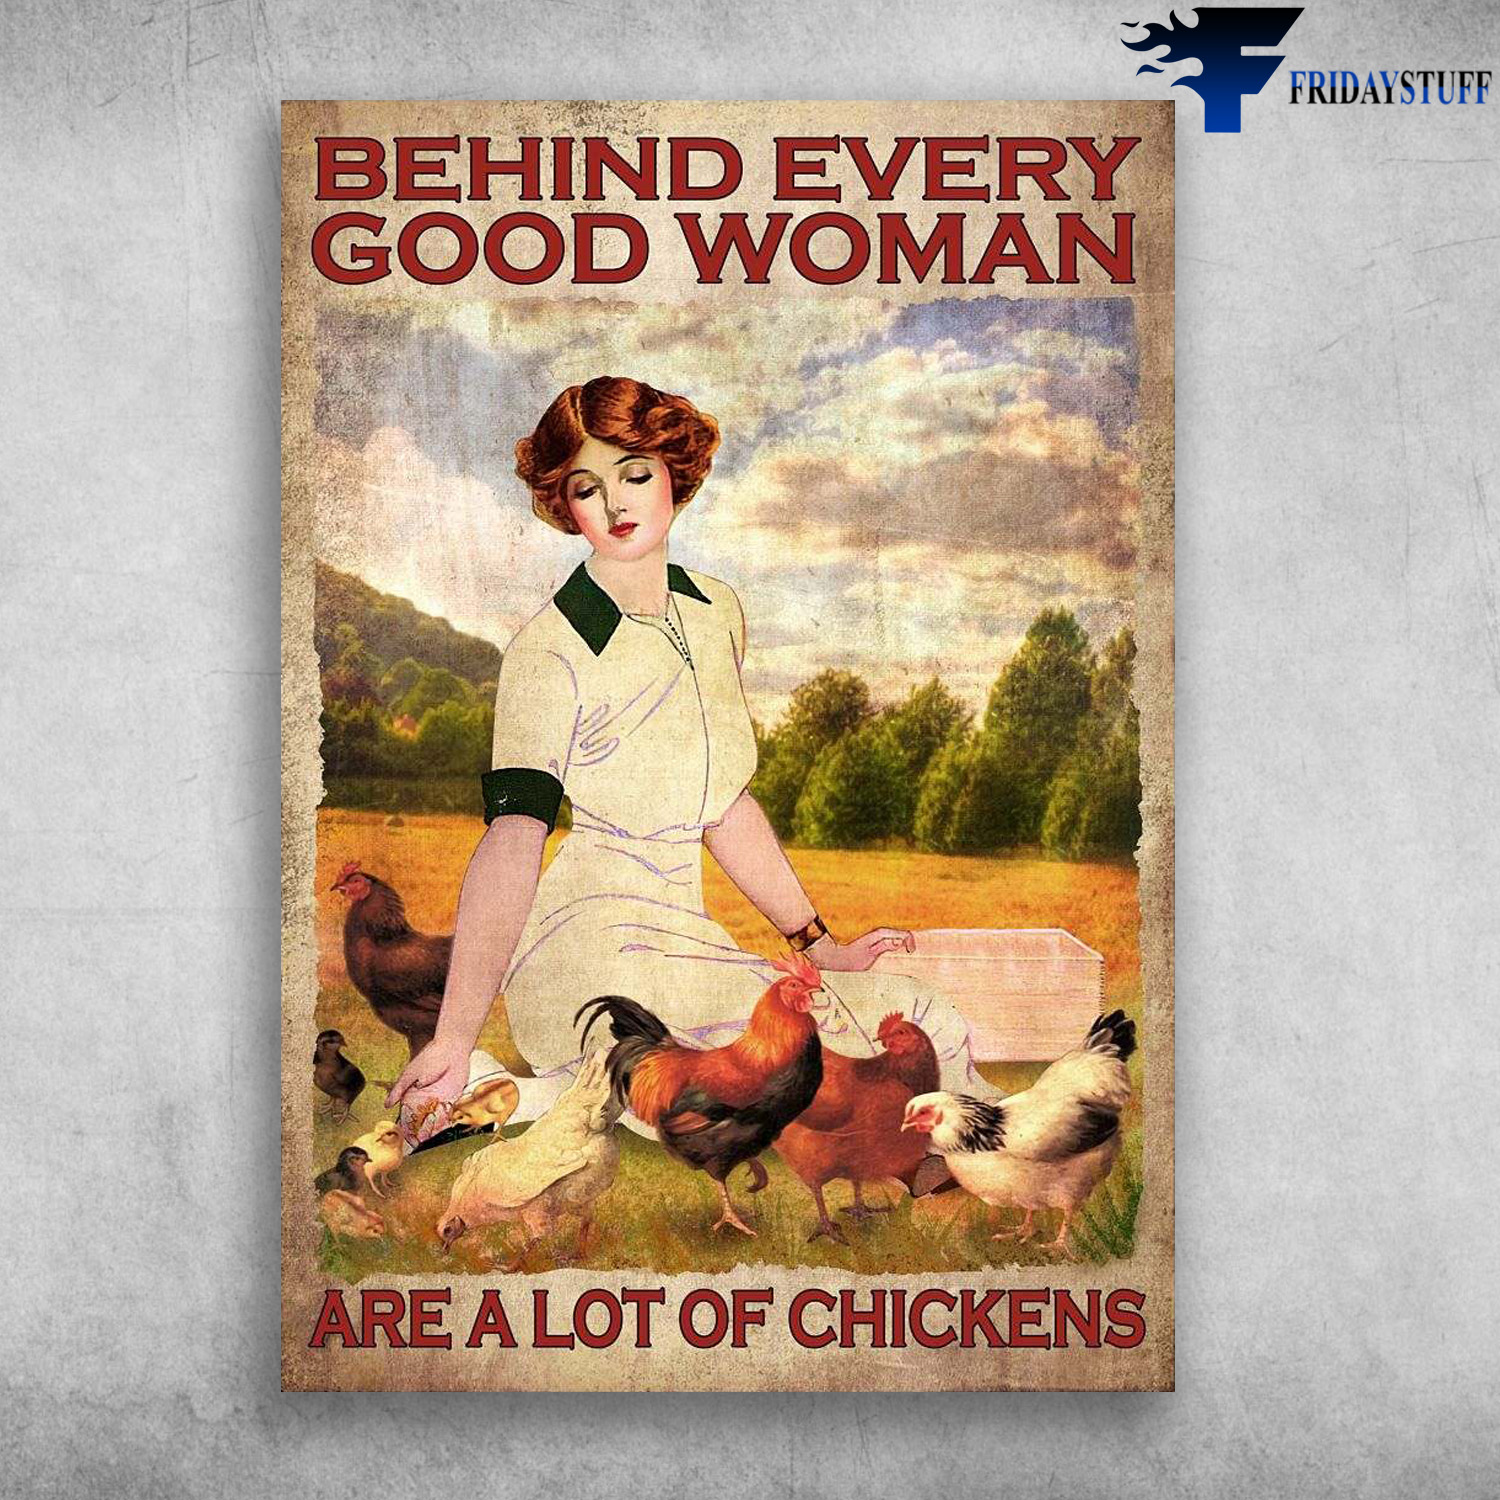 Chicken Breeding, Girl Loves Chicken - Behind Every Good Woman, Are A Lot Of Chickens